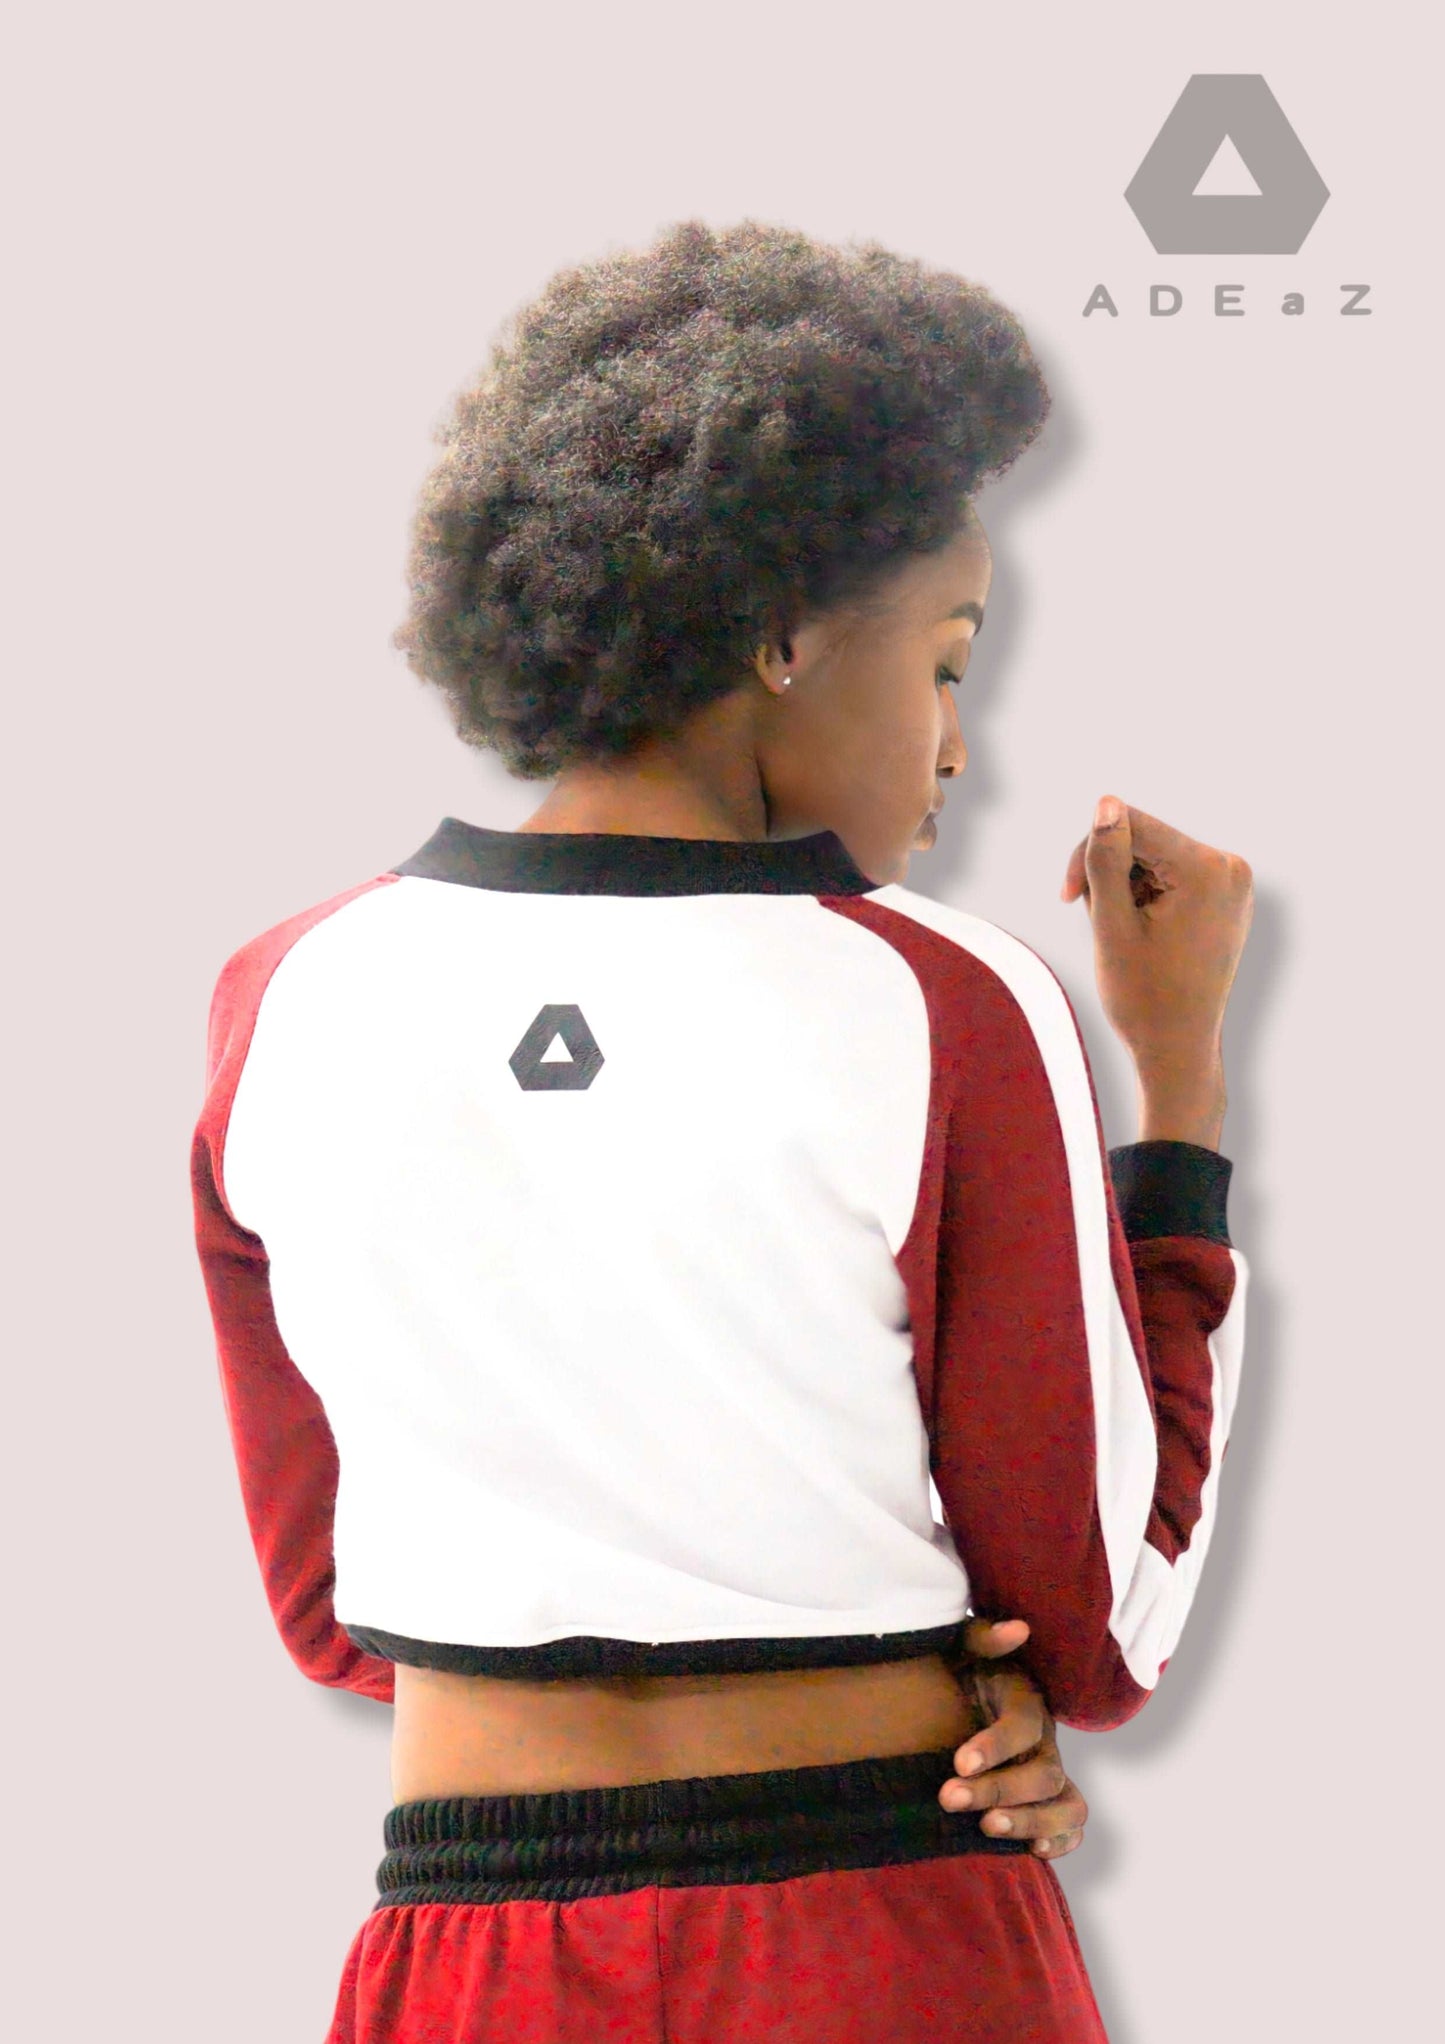 Ladies Cool Crop Top: Trendy and stylish crop top for women, exuding a cool and confident vibe.